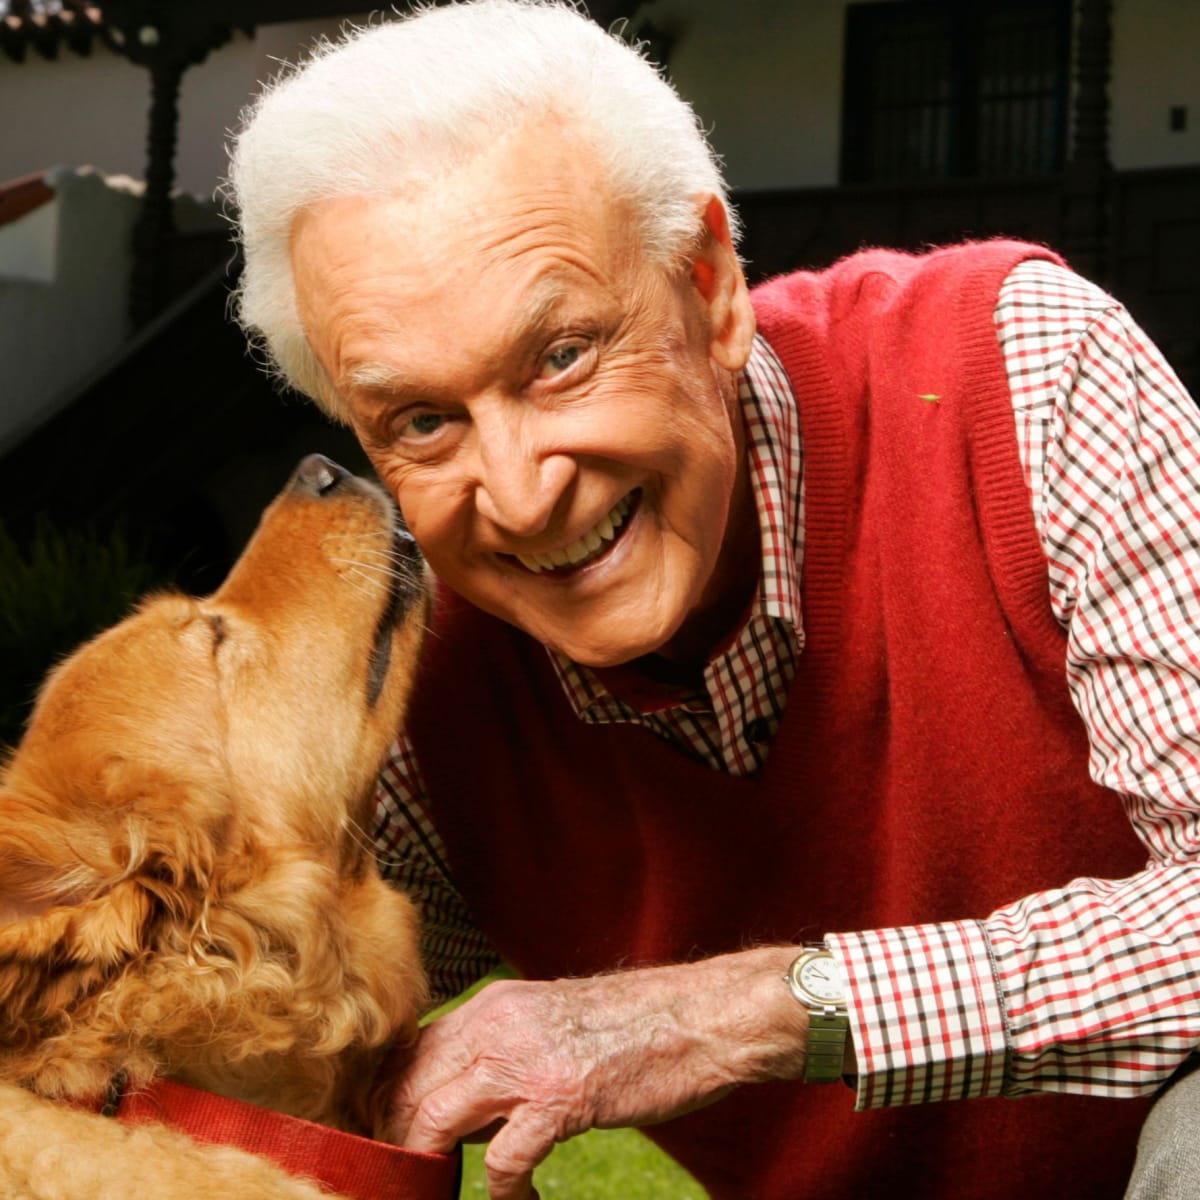 The Price Is Right Host, Happy Gilmore Star Bob Barker Dead at Age 99